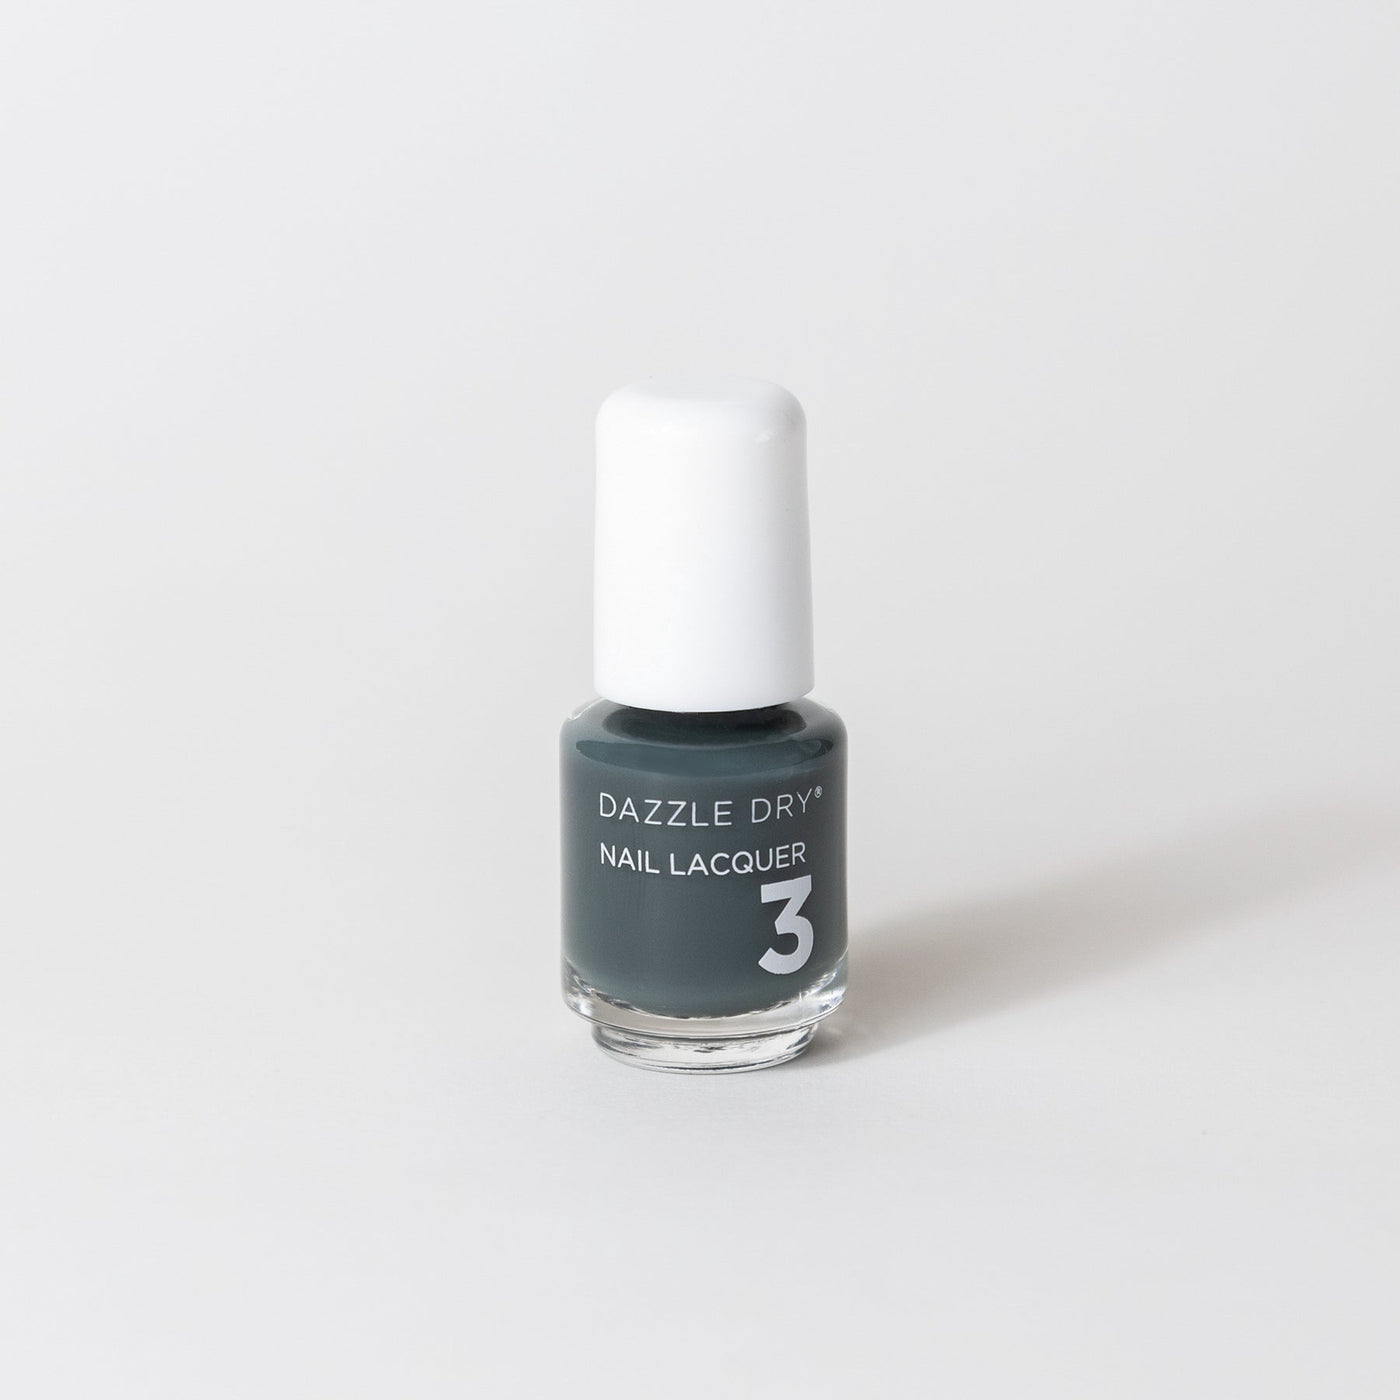 Northern Lights Mini – Nail Lacquer by Dazzle Dry